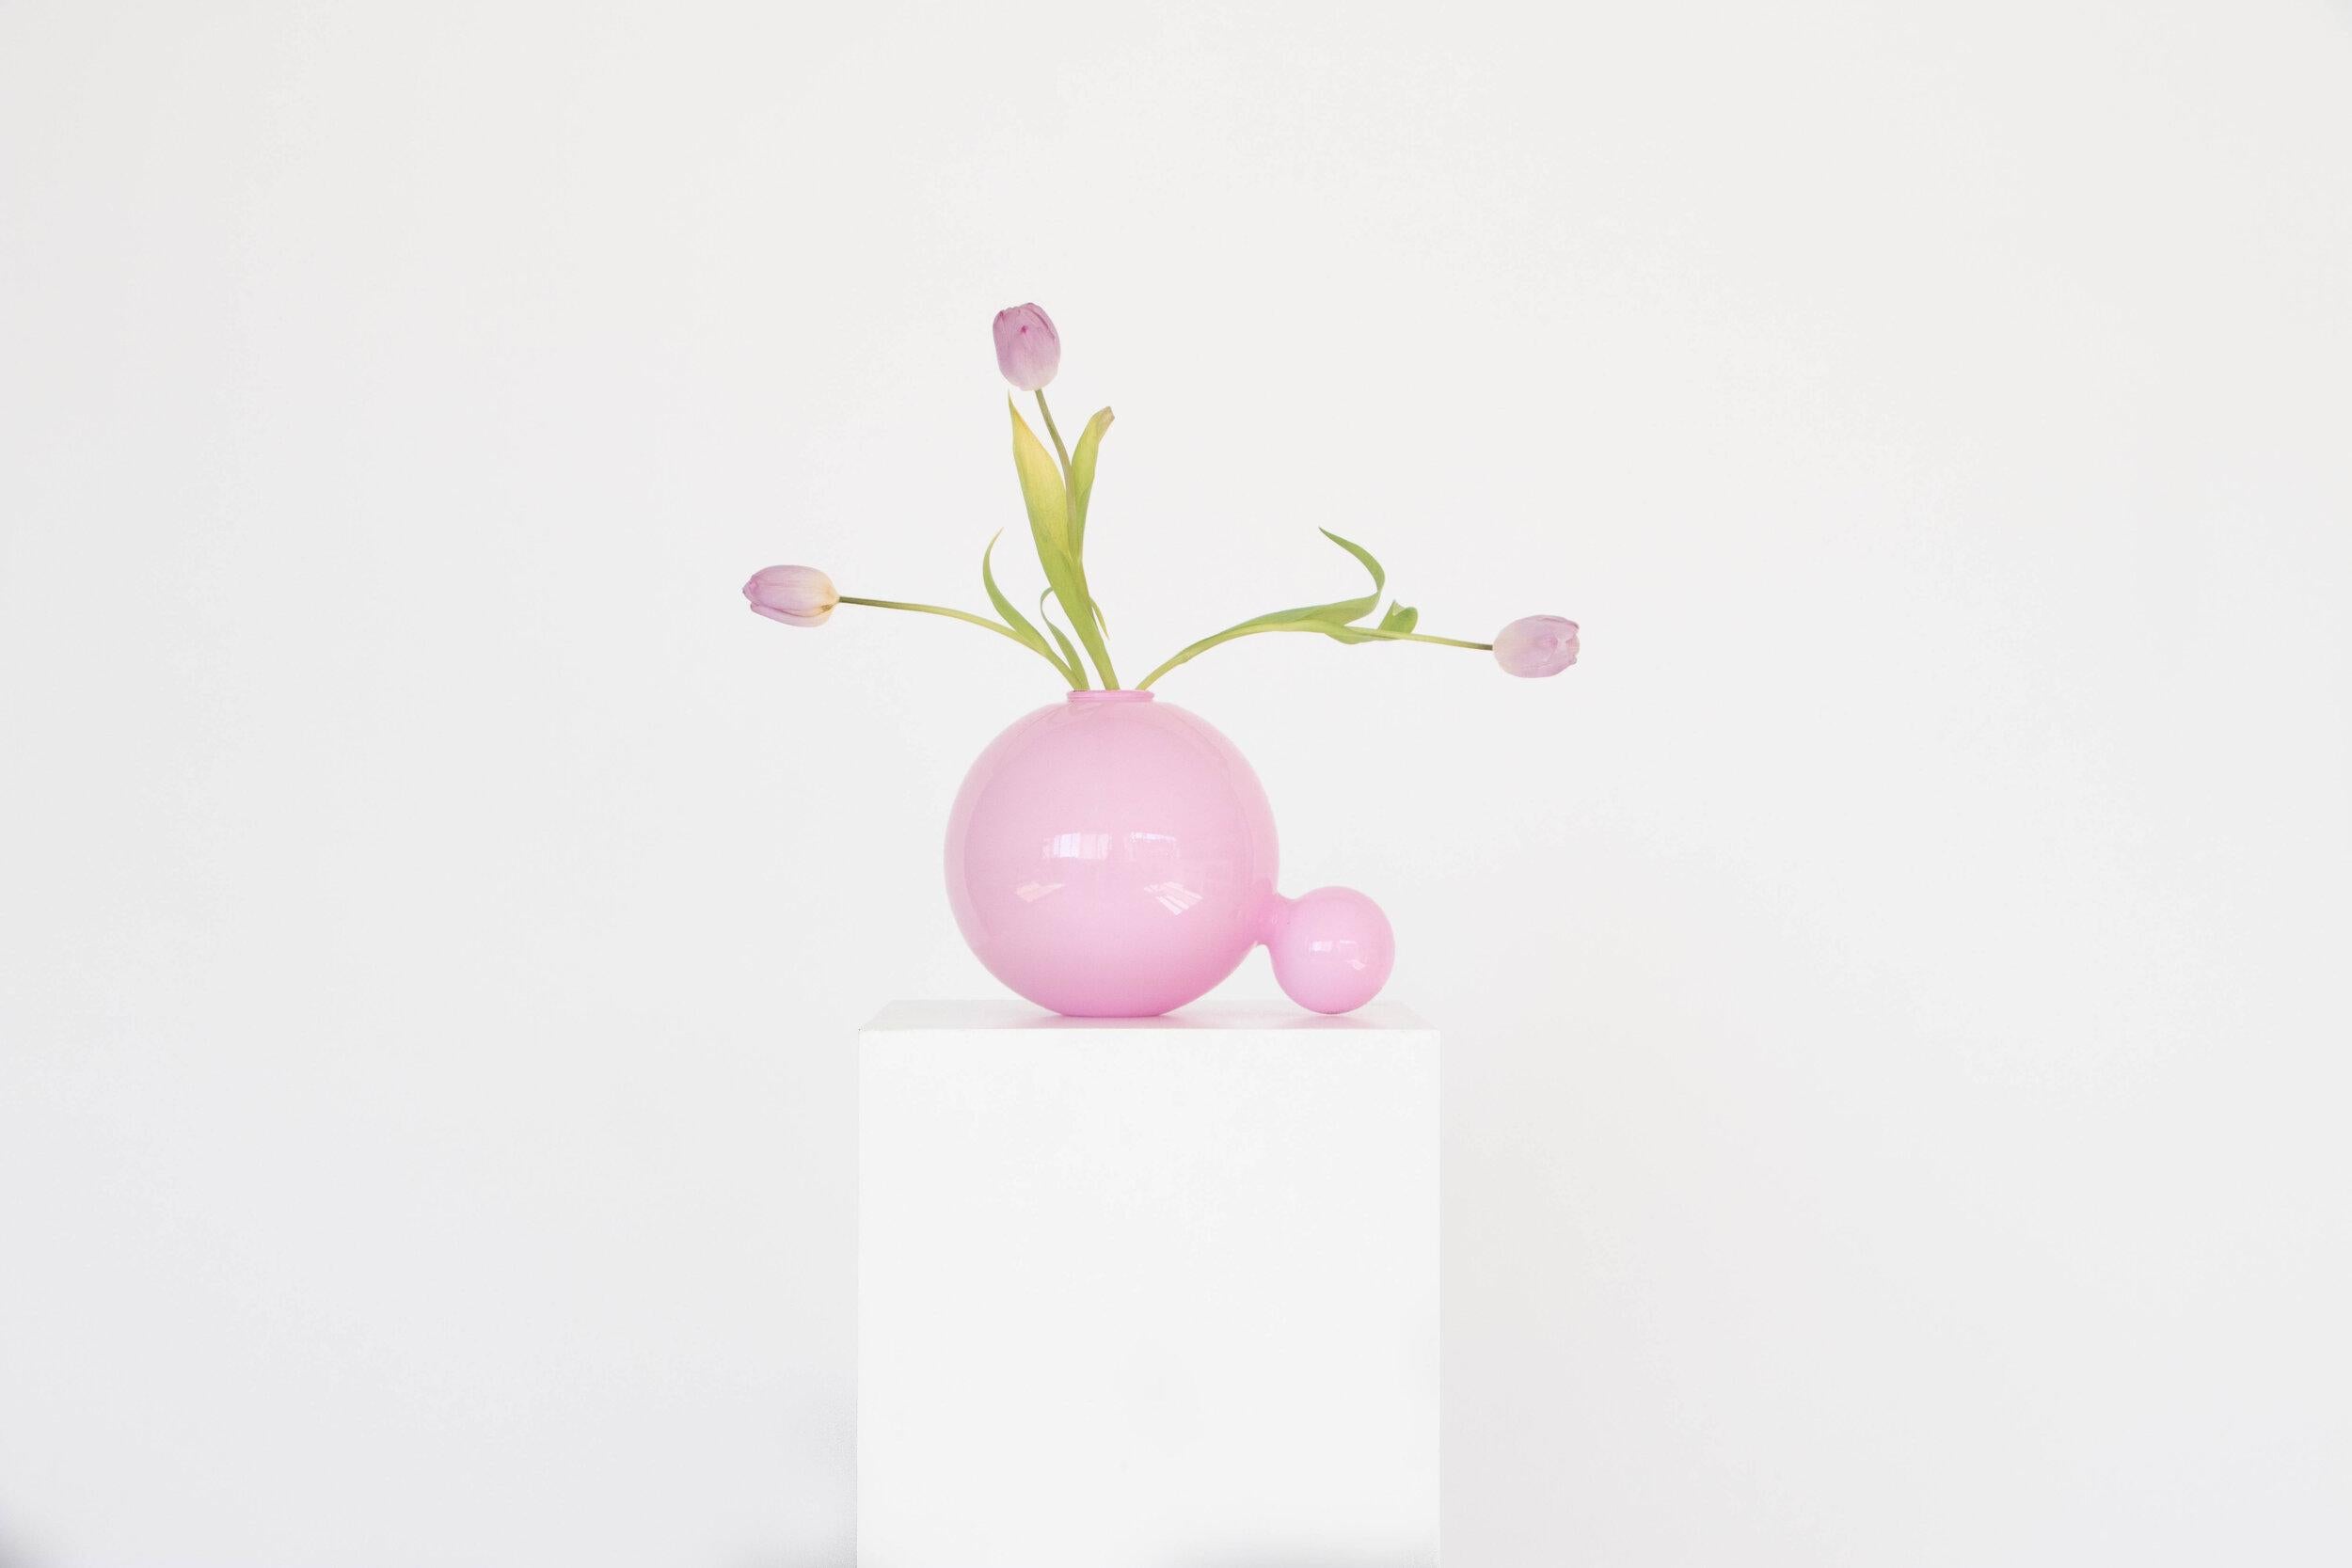 A set of 7 Opaque pink double bubble vase by Valeria Vasi.
Handmade in Barcelona, 2021.
Materials: glass.
Dimensions: 18 x 7 cm.
Also available in: opaque pink, opaque mint, opaque lilac.

A sculptural vase entirely crafted in Barcelona by a